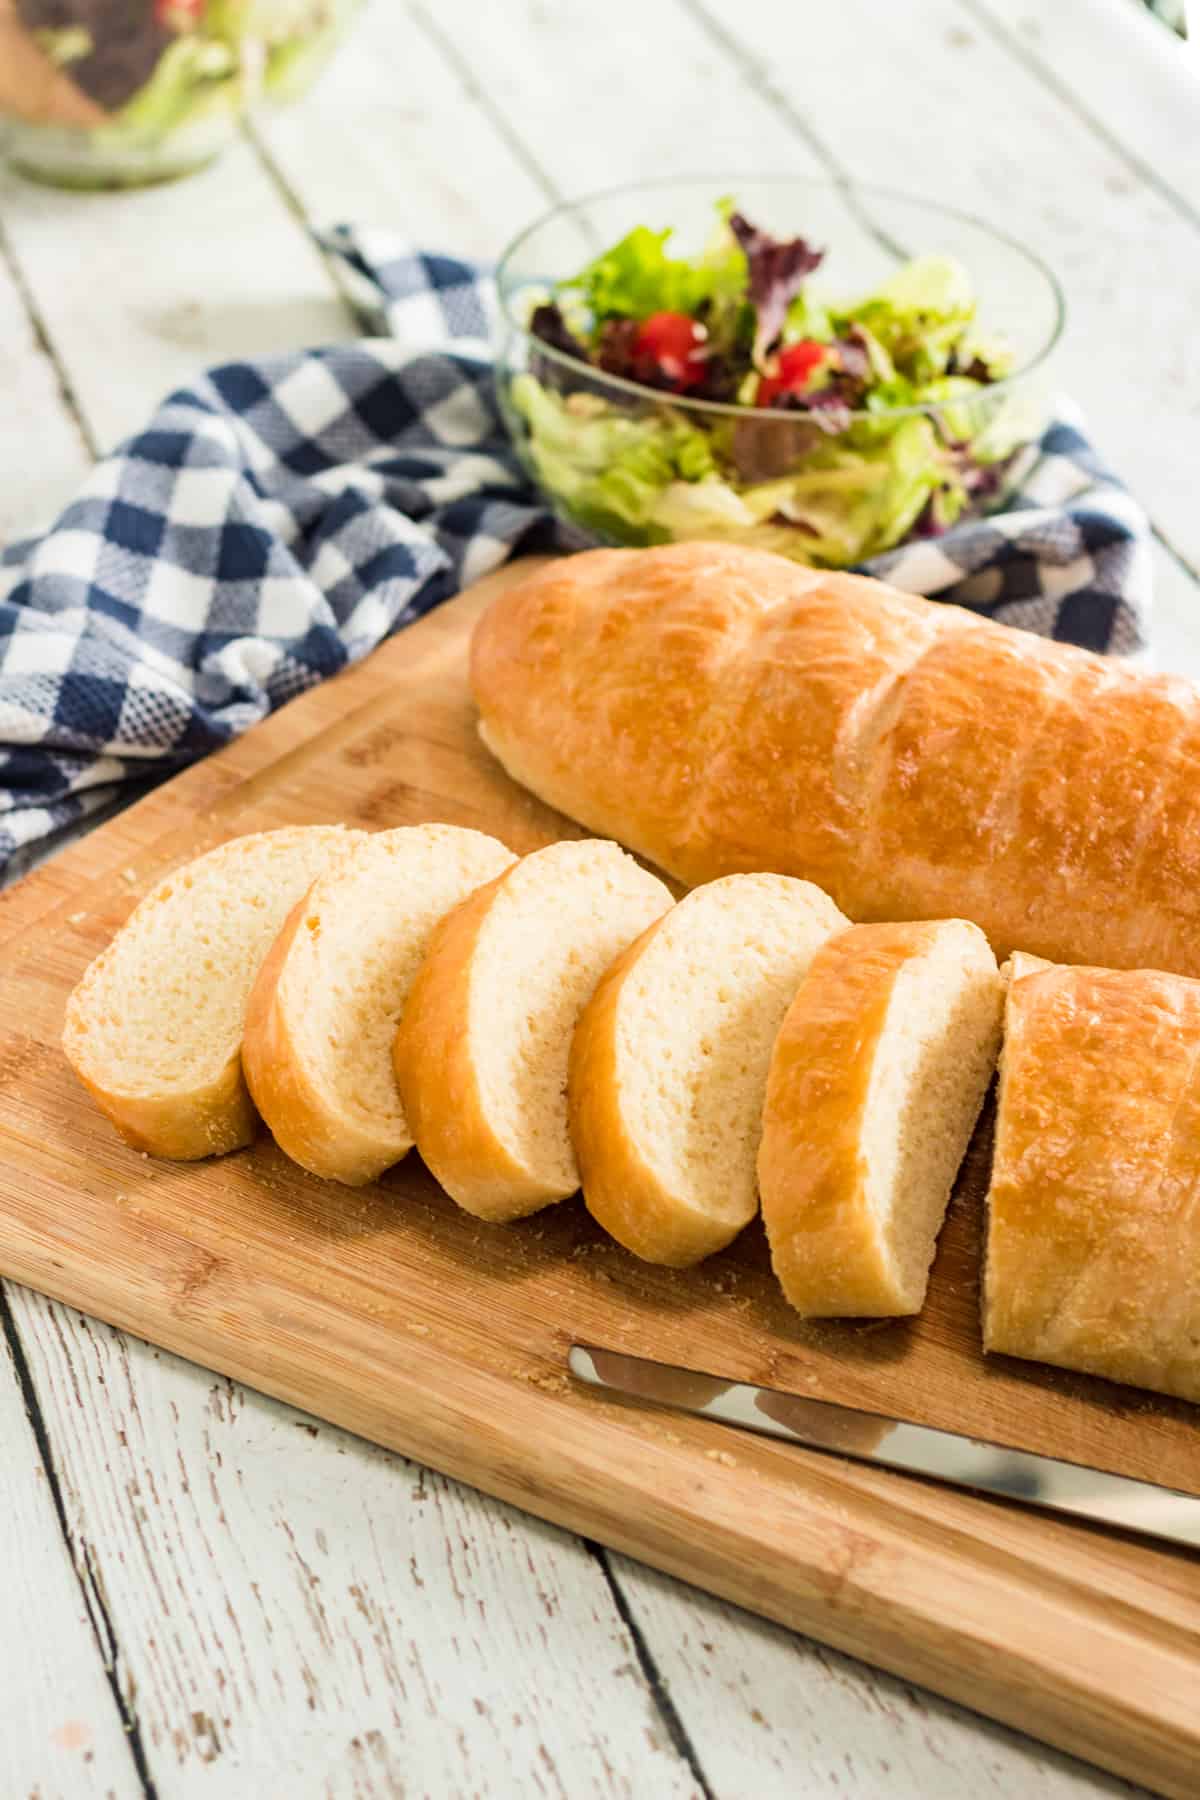 whole loaf french bread and sliced french bread on cutting board with blue checked napkin